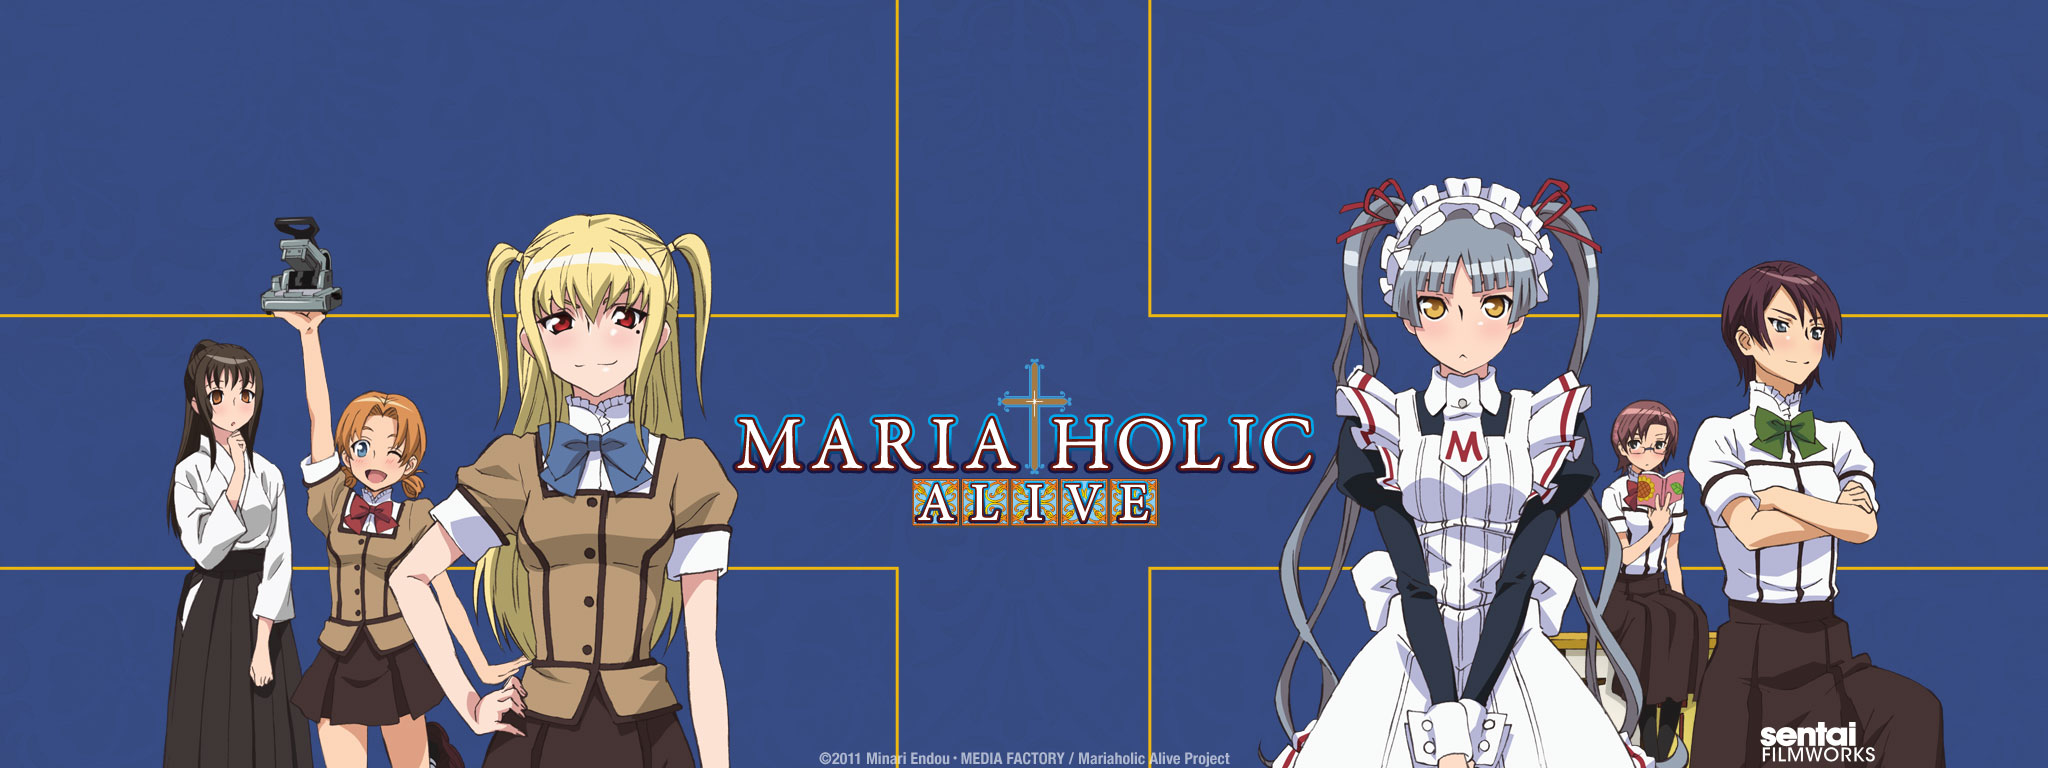 Title Art for Maria Holic Alive